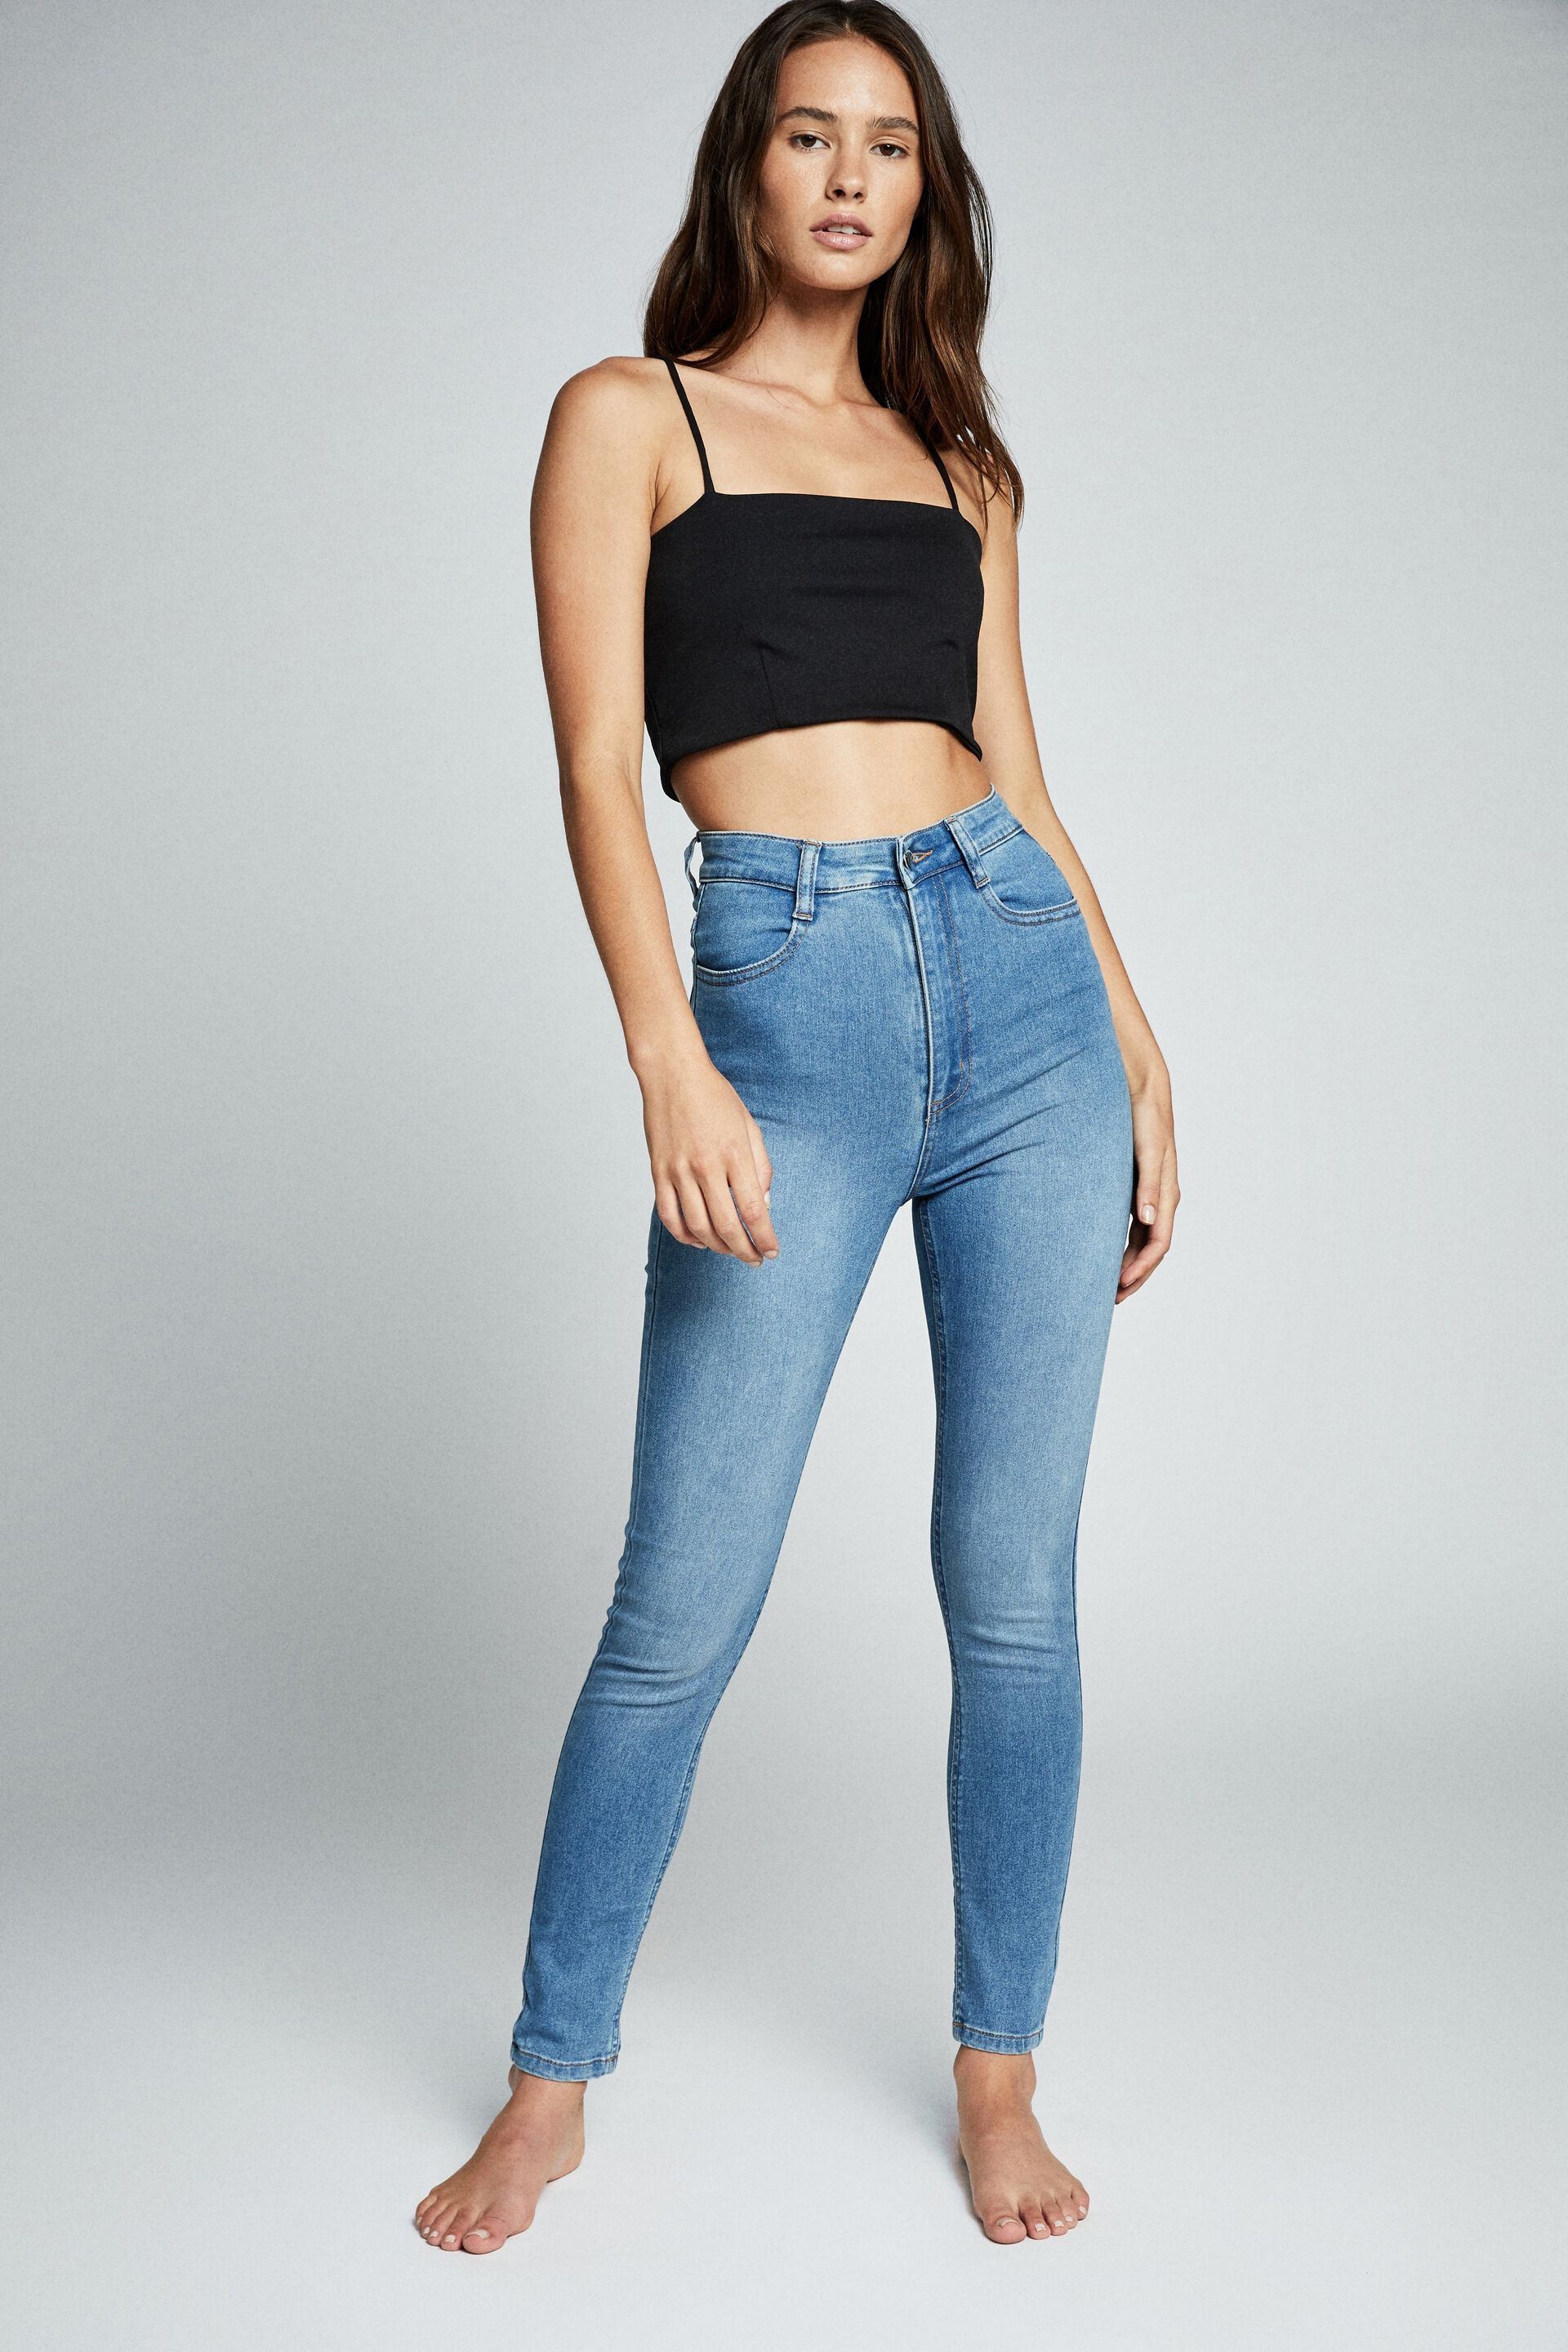 Women's High Waisted Jeans, Jeggings 